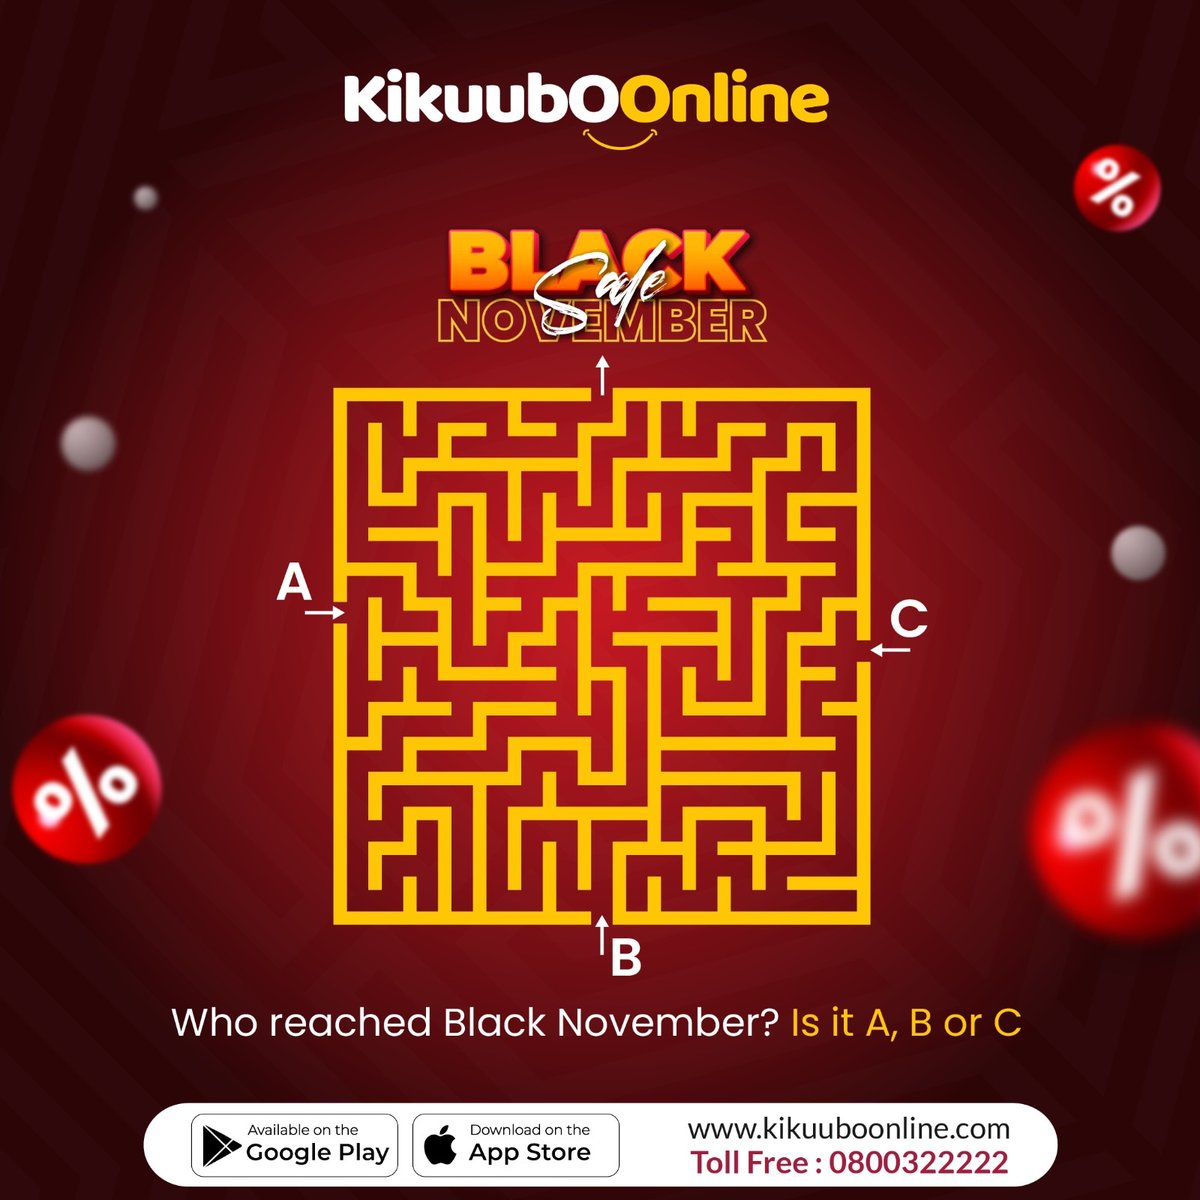 Is it A, B or C 🤔 Comment your answers below if you think you can see the path. #BlackNovember #discounts